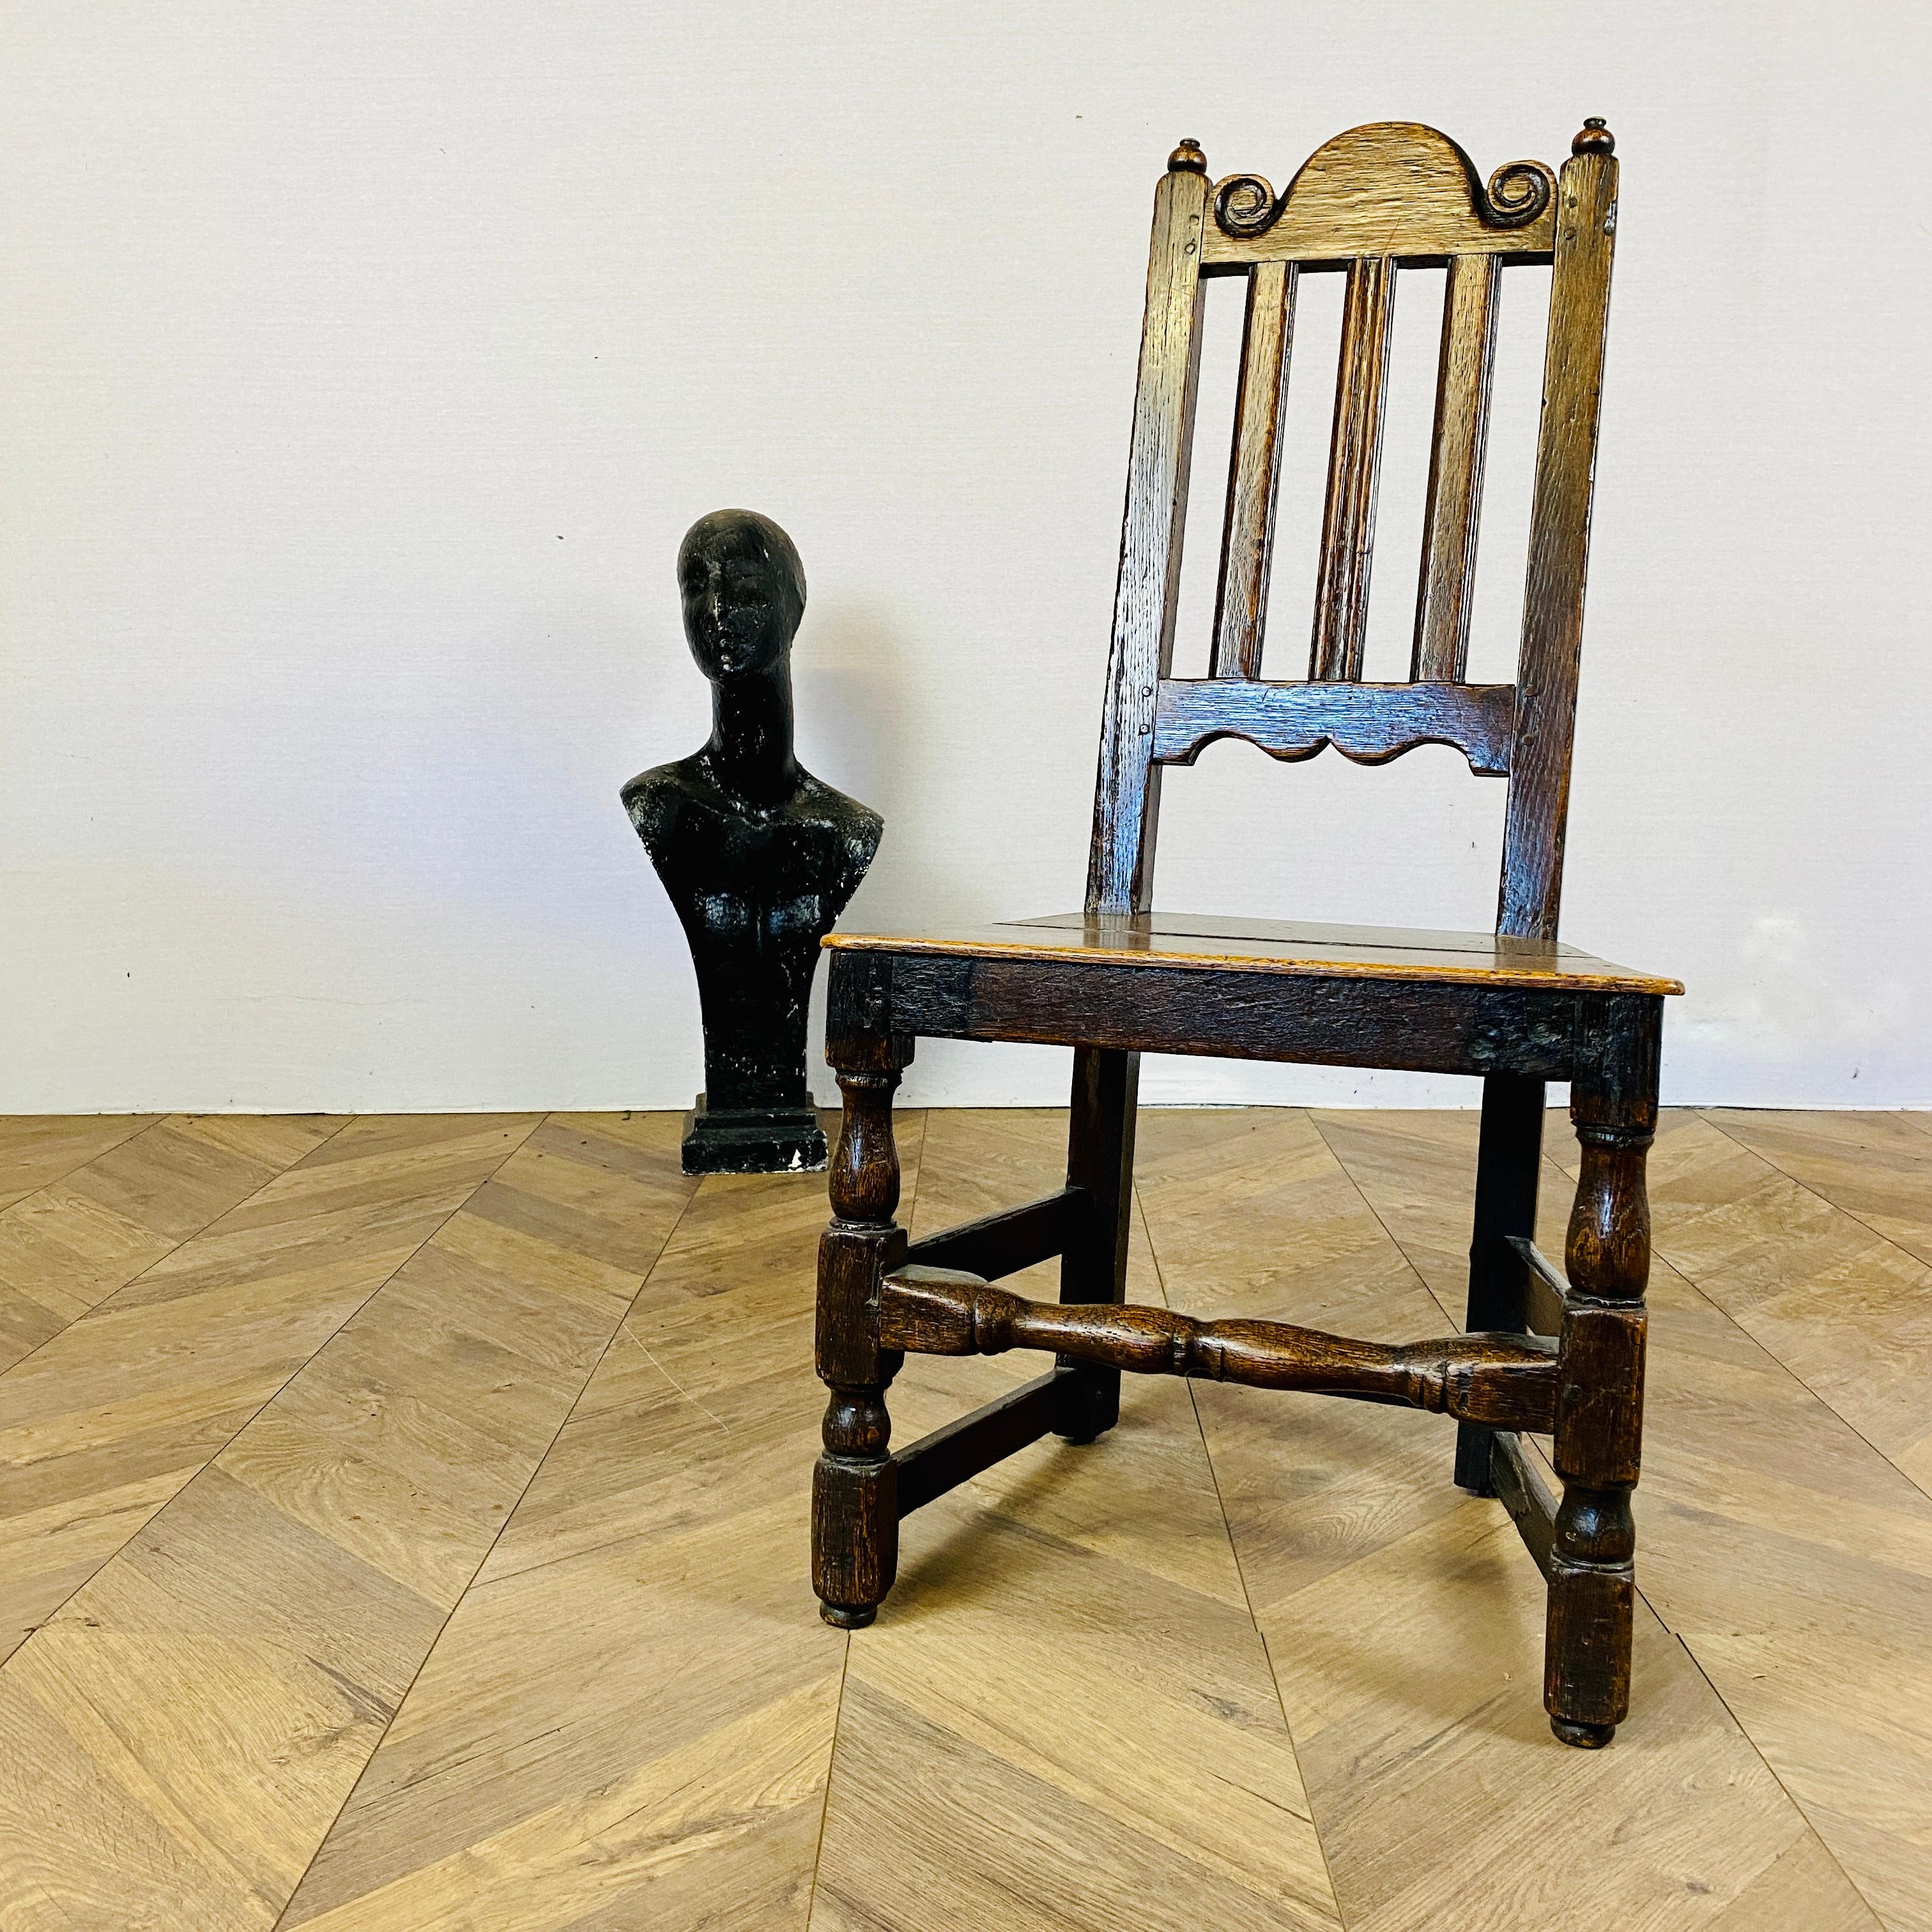 A Simple Antique English 17th Century chair, circa 1660 - 1690

Dating to the reign of Charles II of England, the chair is made from oak, with carved cresting rail over three splats, to a boarded seat and baluster turned under frame.

The chair